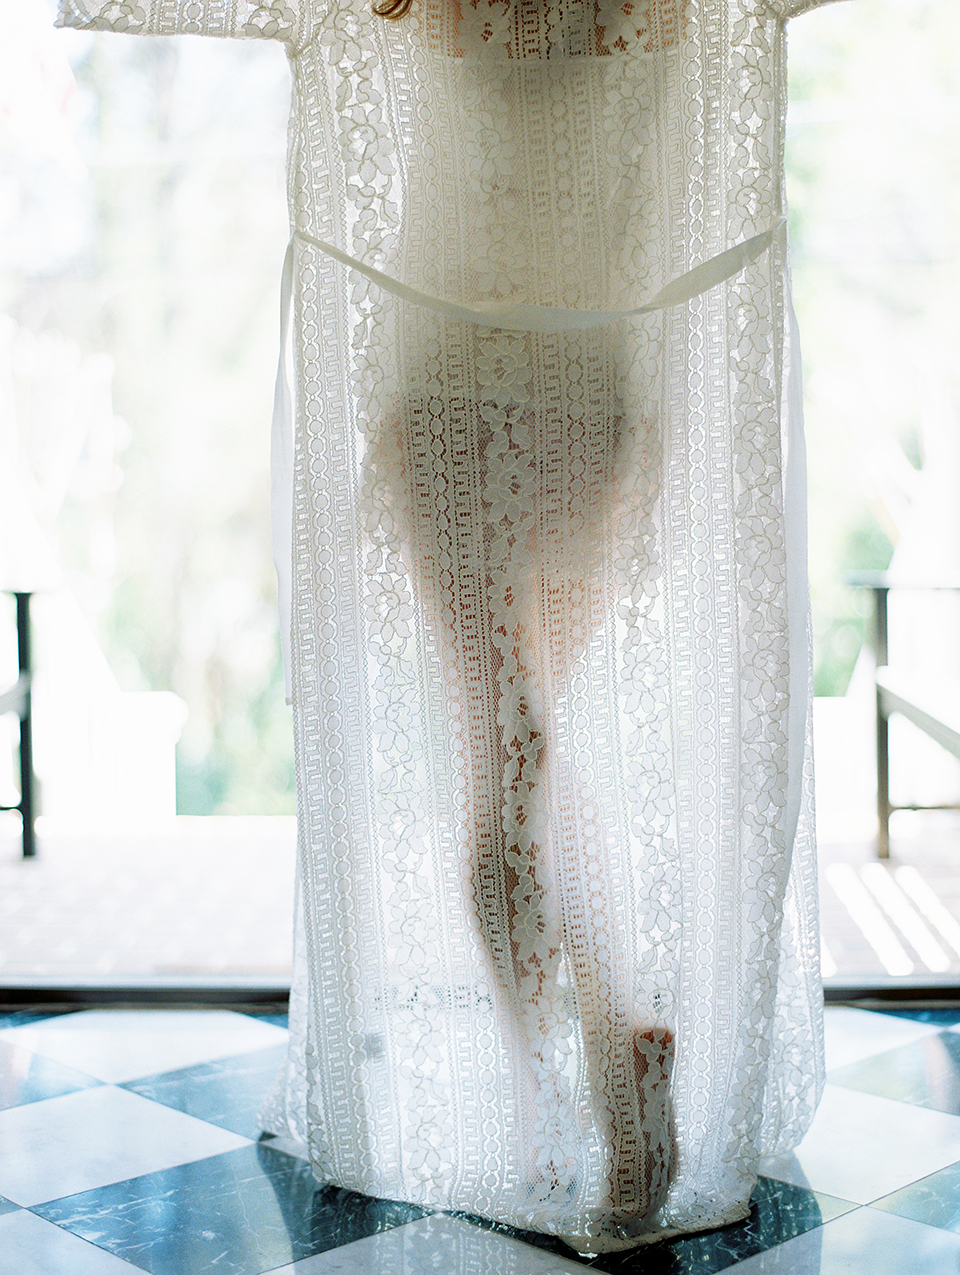 Raleigh, North Carolina film boudoir session at home by Hush Boudoir Photography